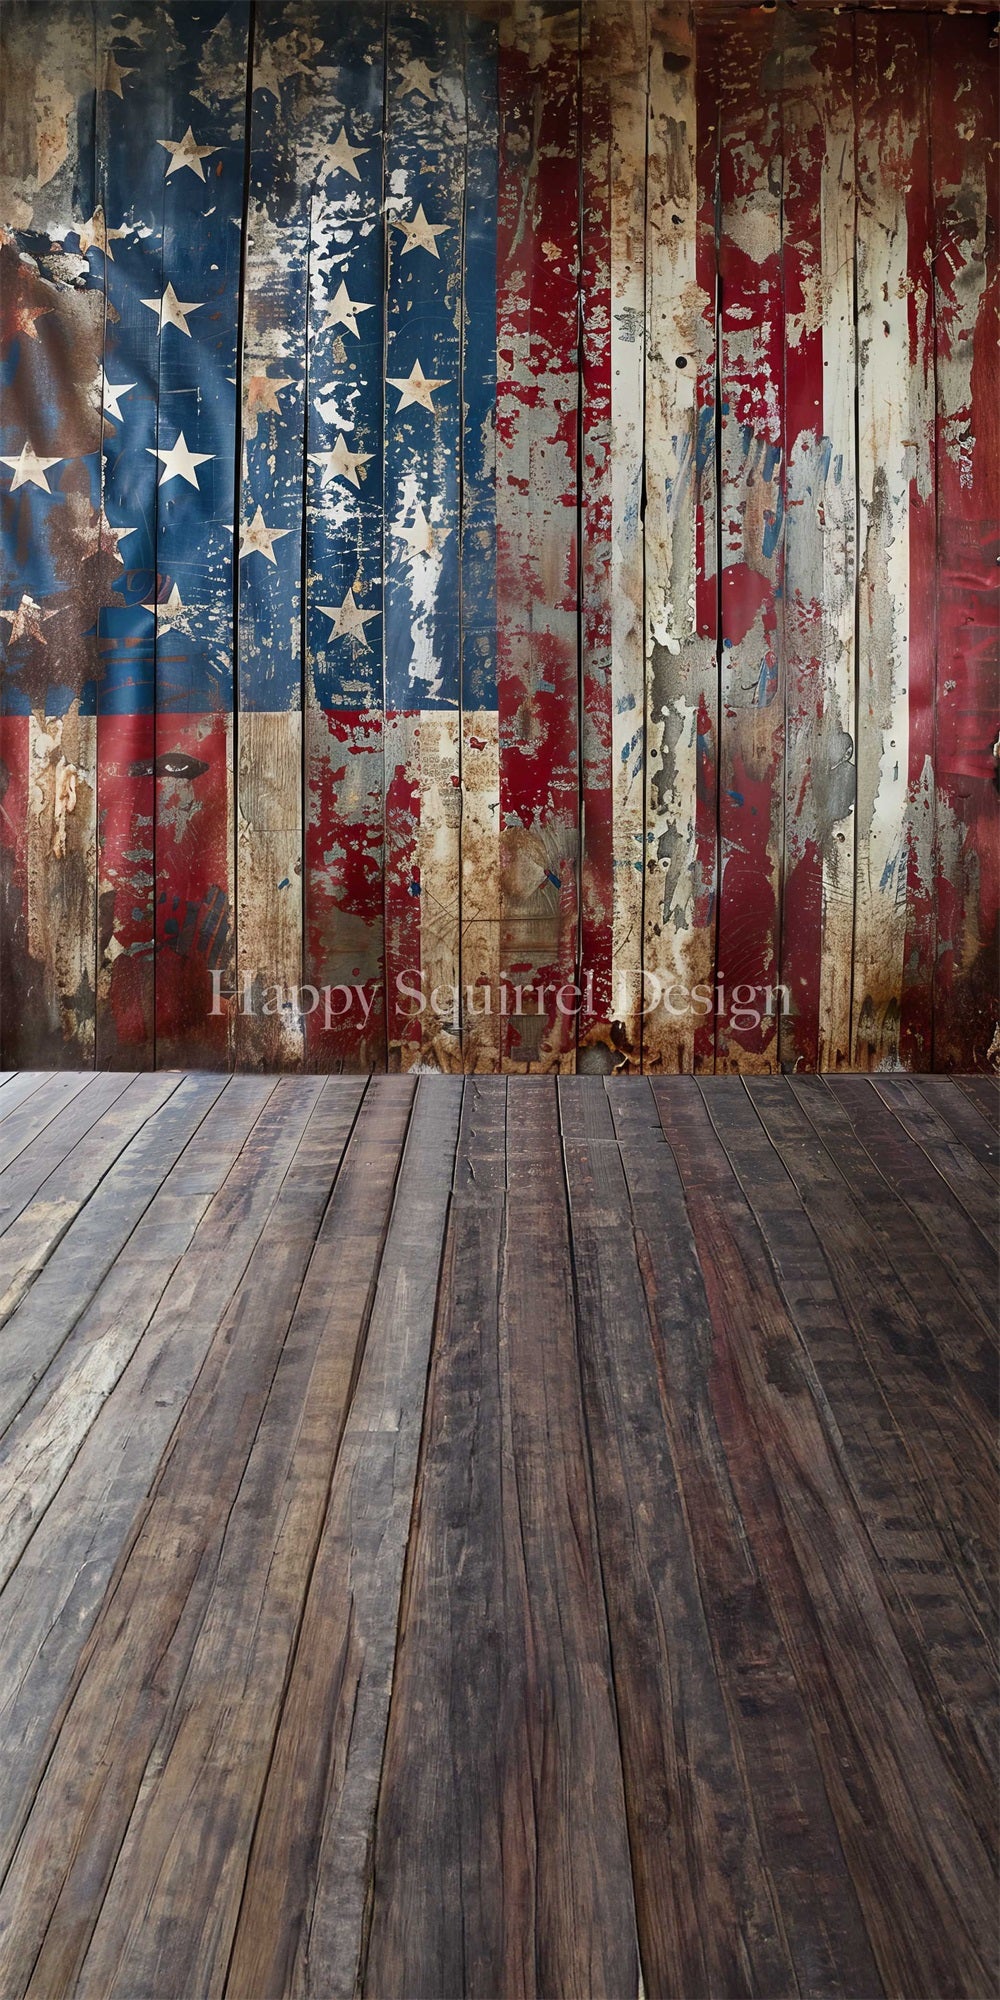 Kate Sweep Independence Day Retro Rustic Graffiti Flag Broken Wooden Wall Backdrop Designed by Happy Squirrel Design